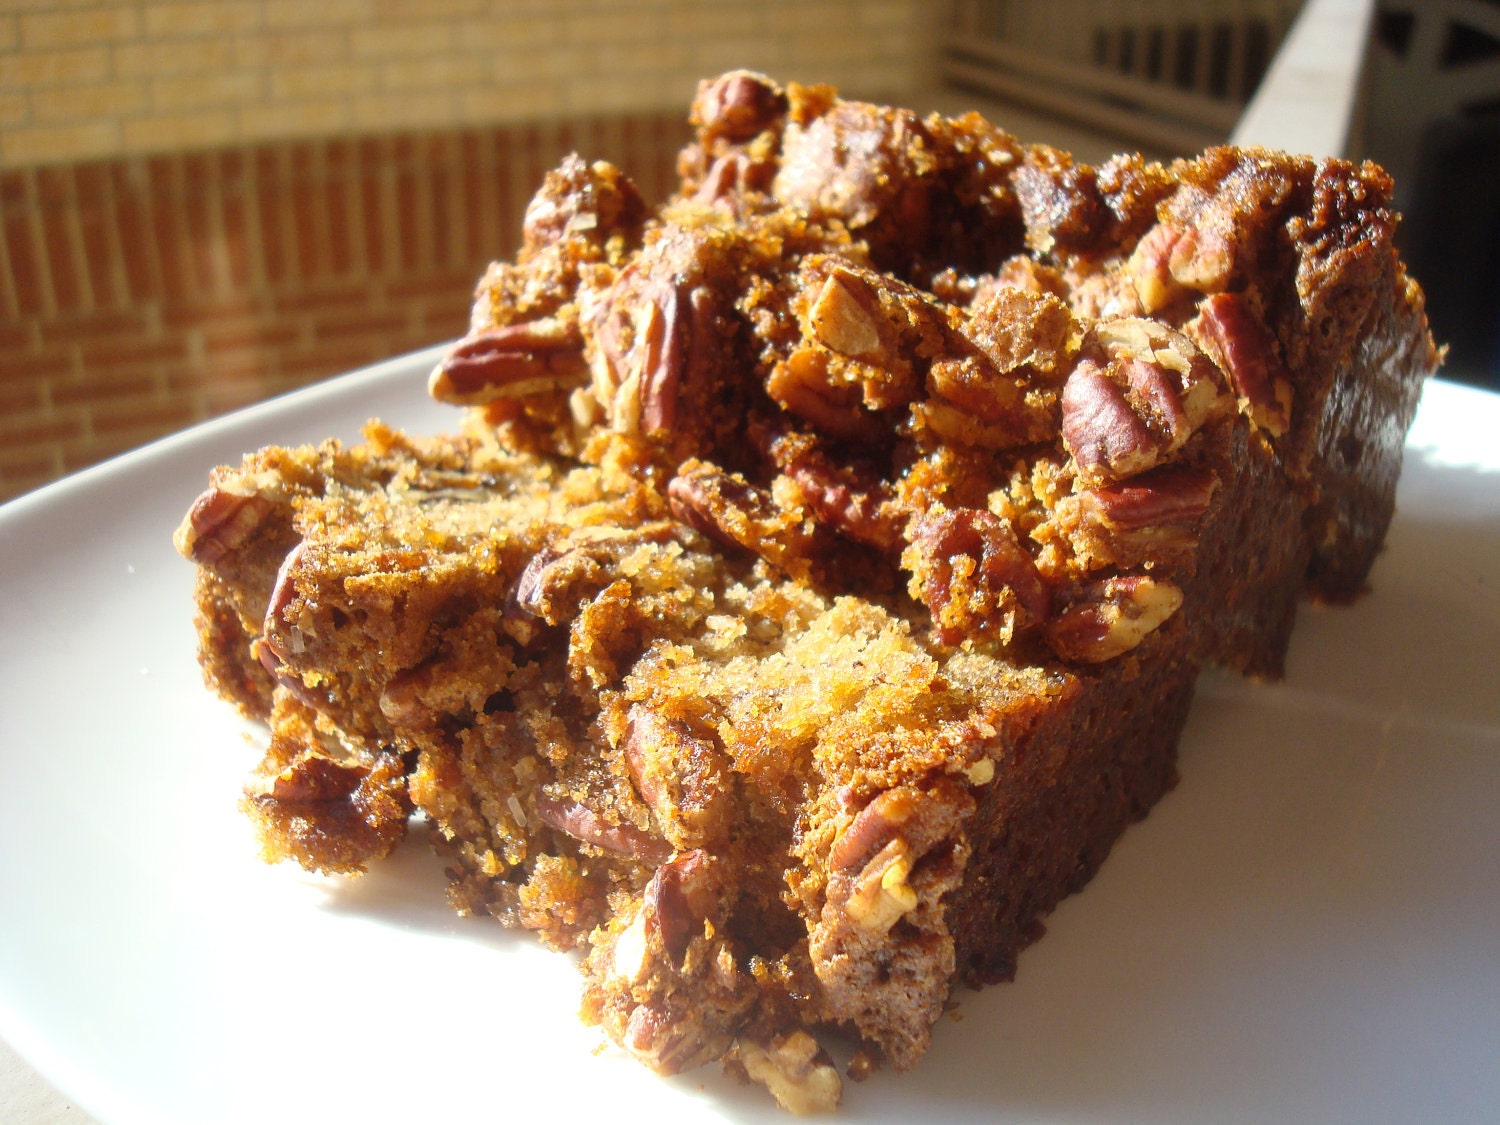 Banana Bread with Nuts and Streusel MADE to Order with the finest ingredients